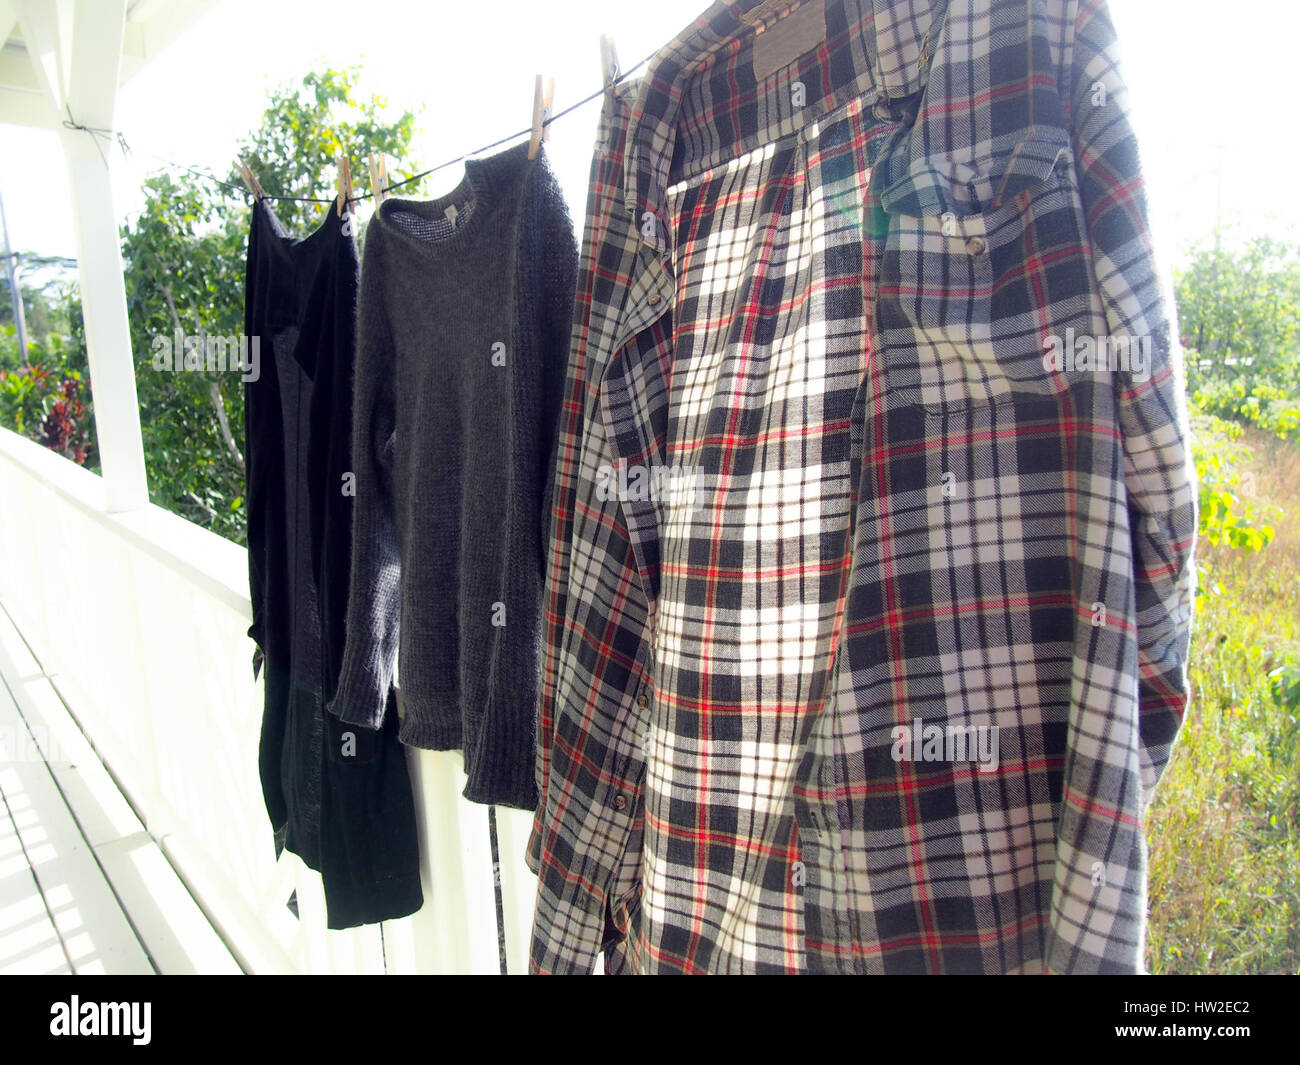 A flannel shirt and two other sweaters hanging on a clothesline in the sun. Stock Photo